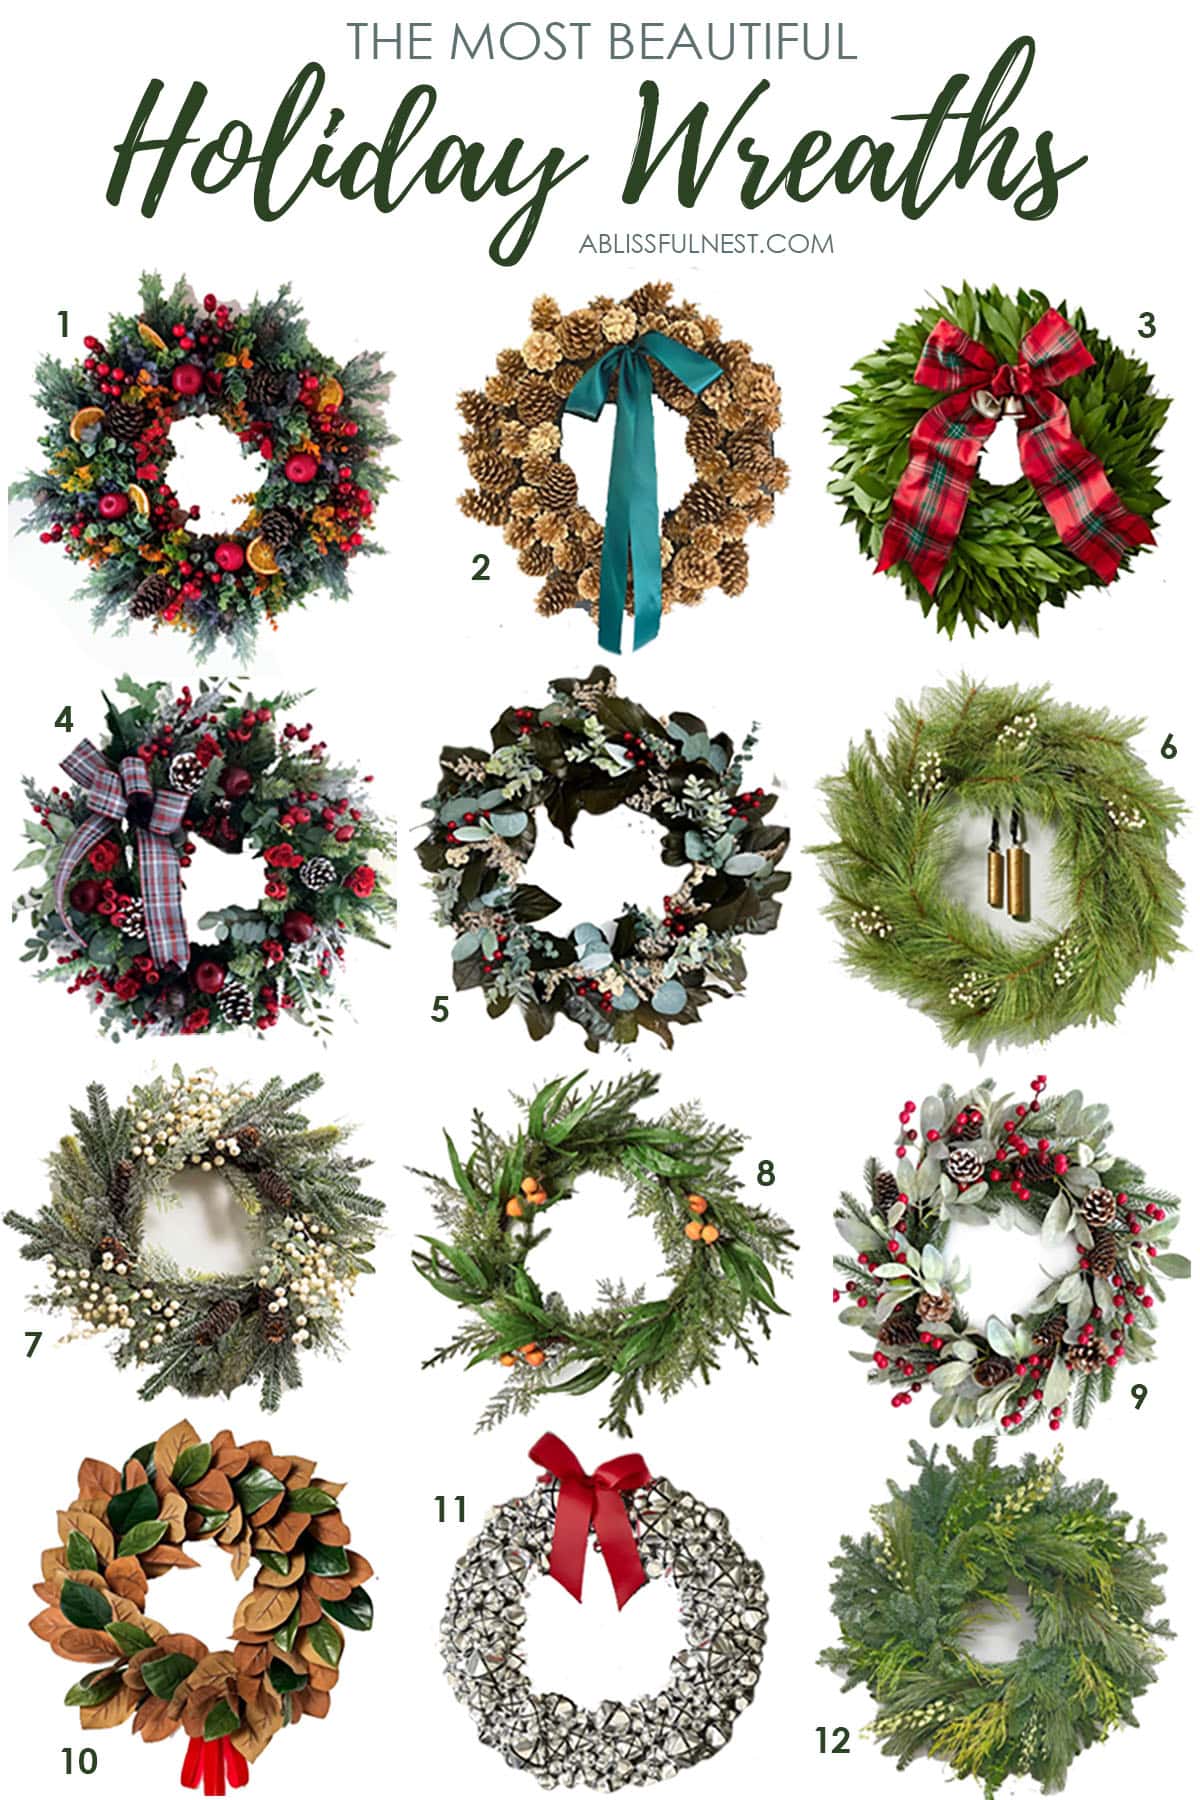 These Christmas wreaths are perfect for your front door, kitchen hood and your windows! So many pretty options and all price points. #ABlissfulNest #christmasdecor #christmasdecorating